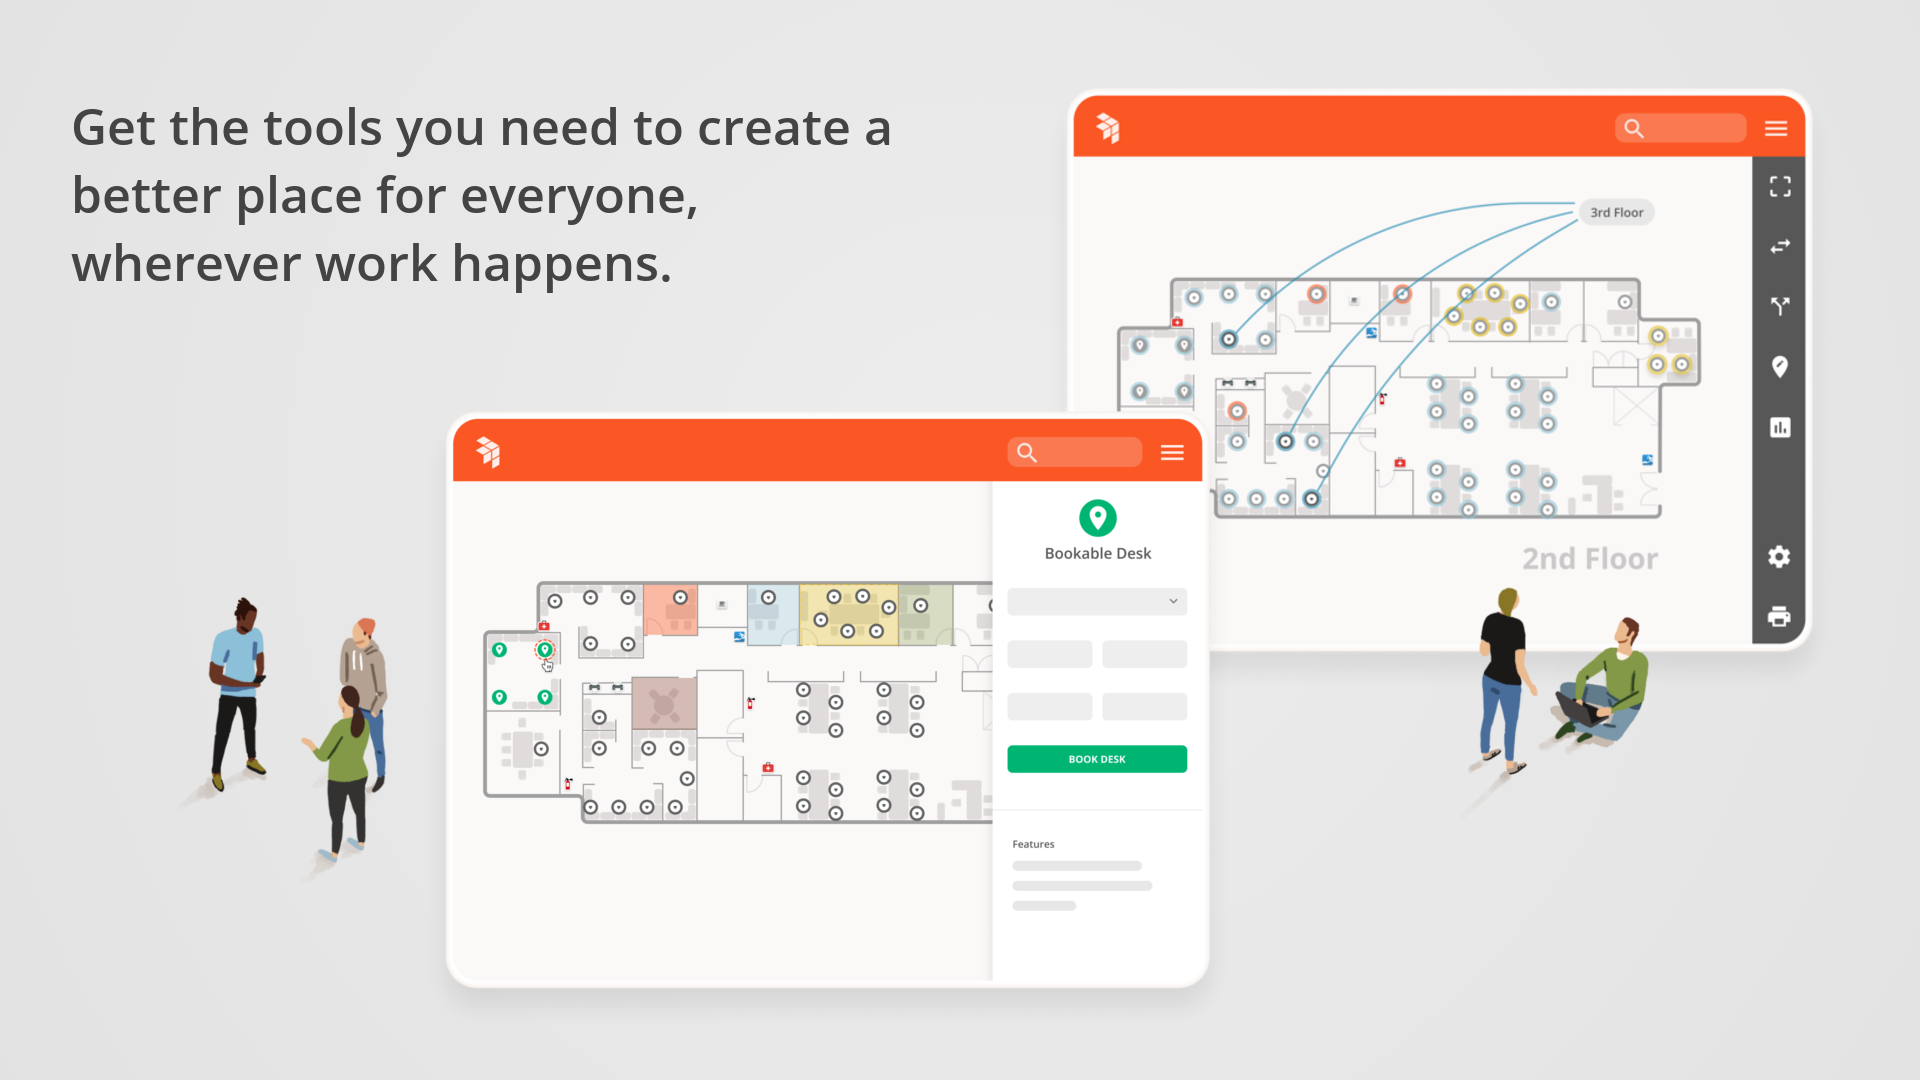 OfficeSpace gives teams easier ways to book desks and rooms, optimize workspaces, check-in visitors, enable connections, and power data-driven decisions with one platform for the Future of Work.